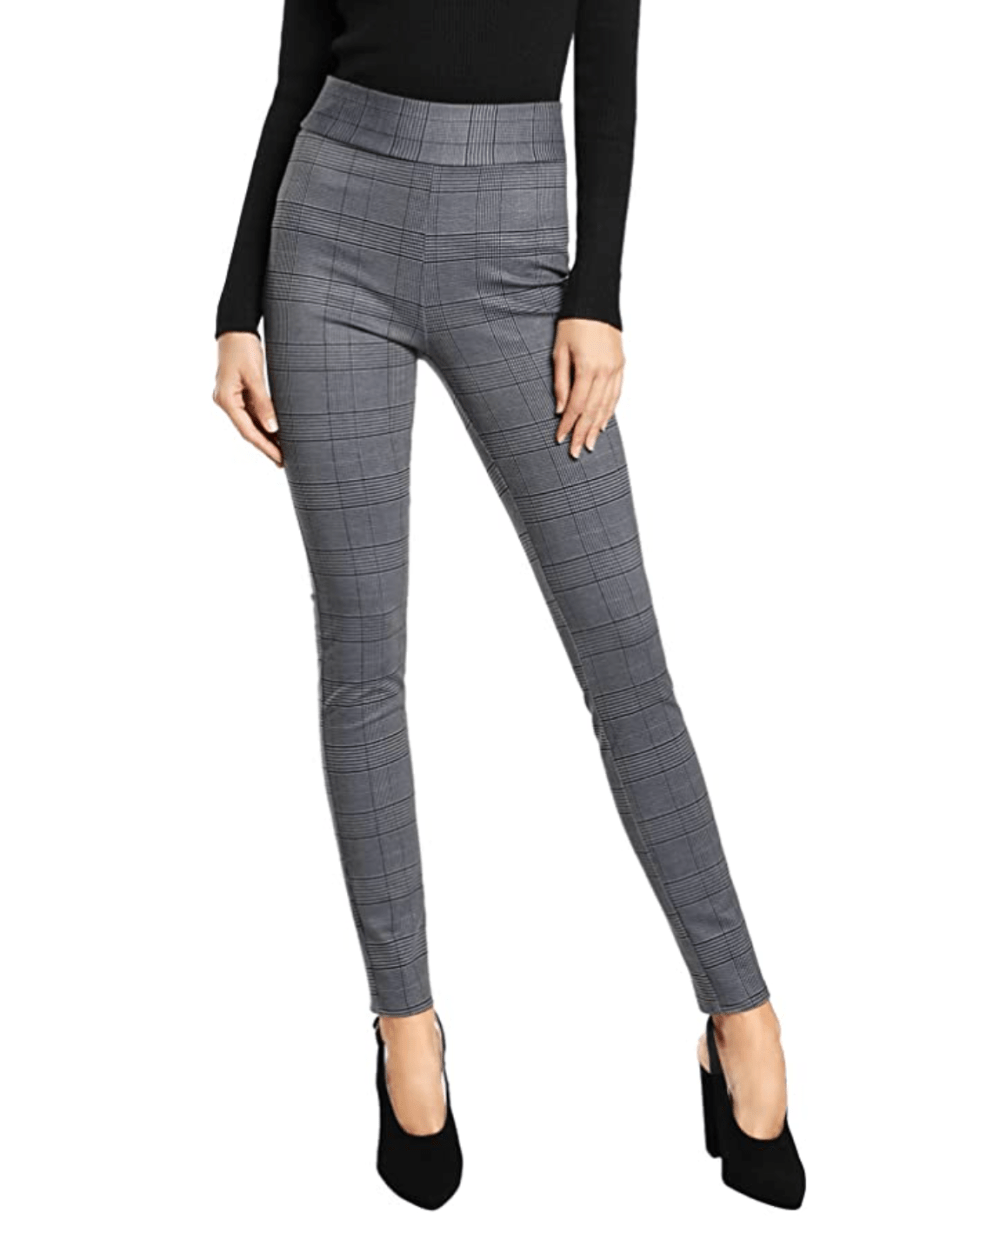 11 Slimming and Leg-Loving Pants to Wear This Fall